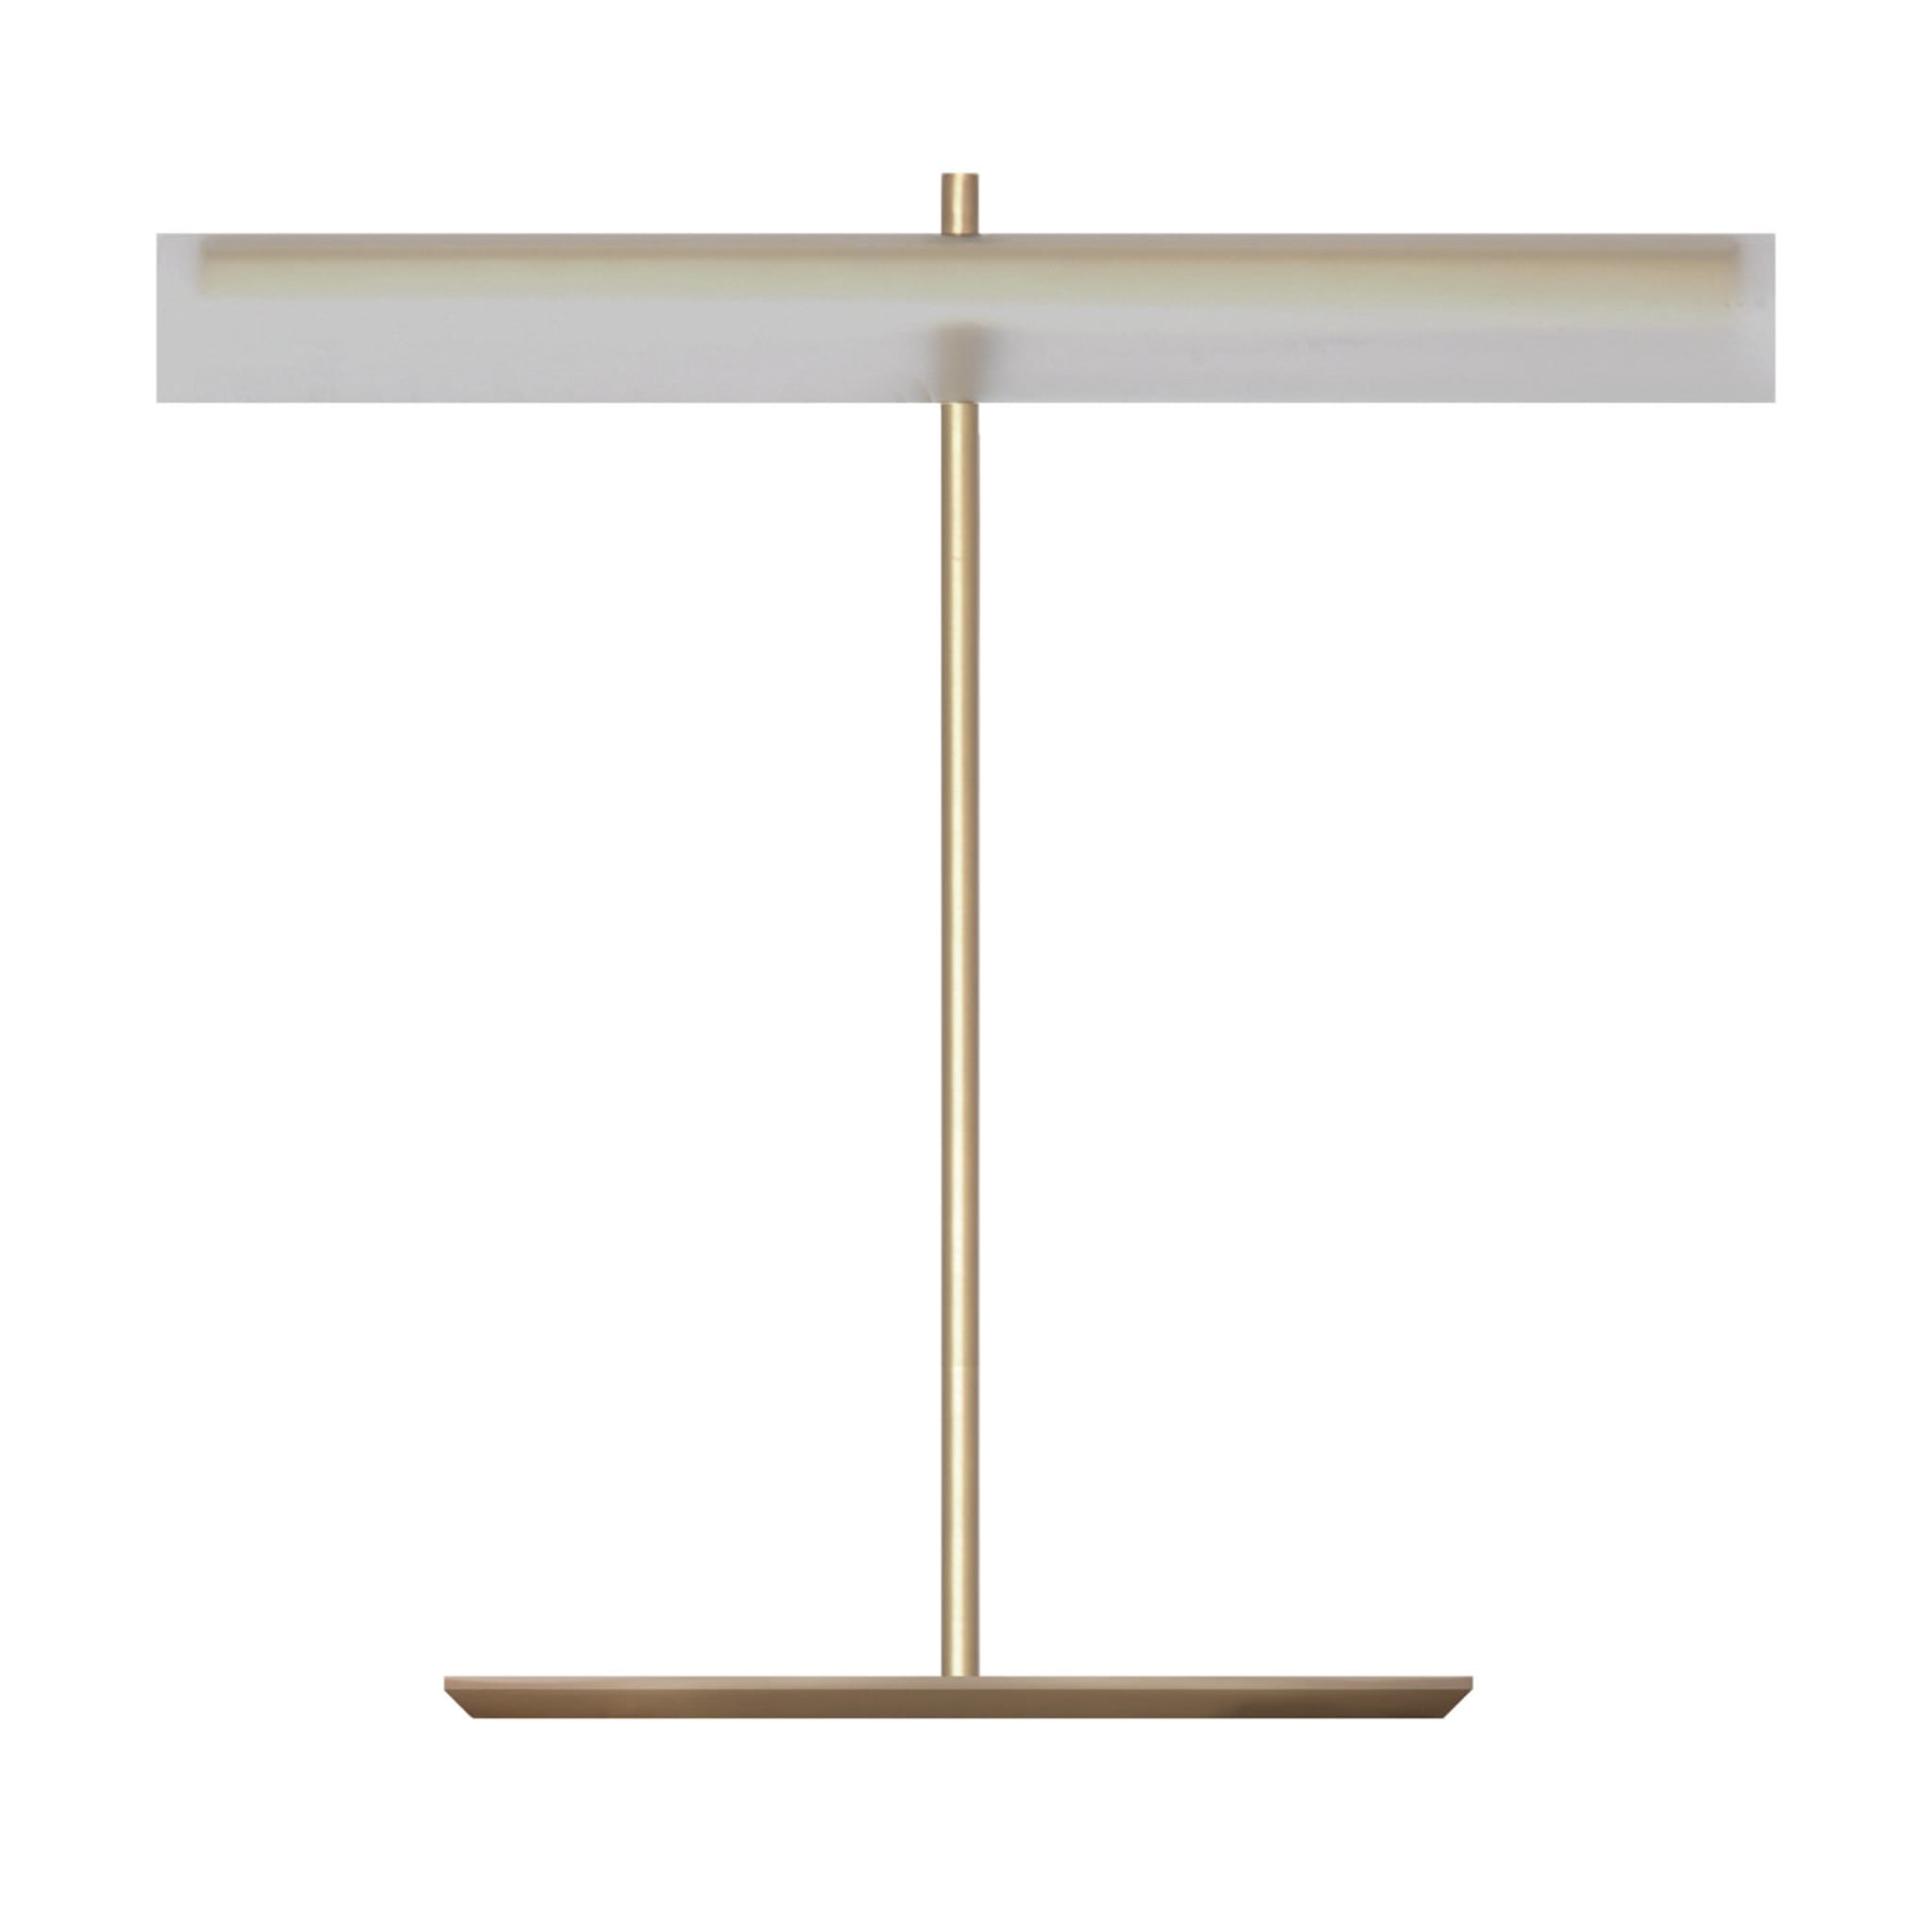 PPT01 table lamp - Main view